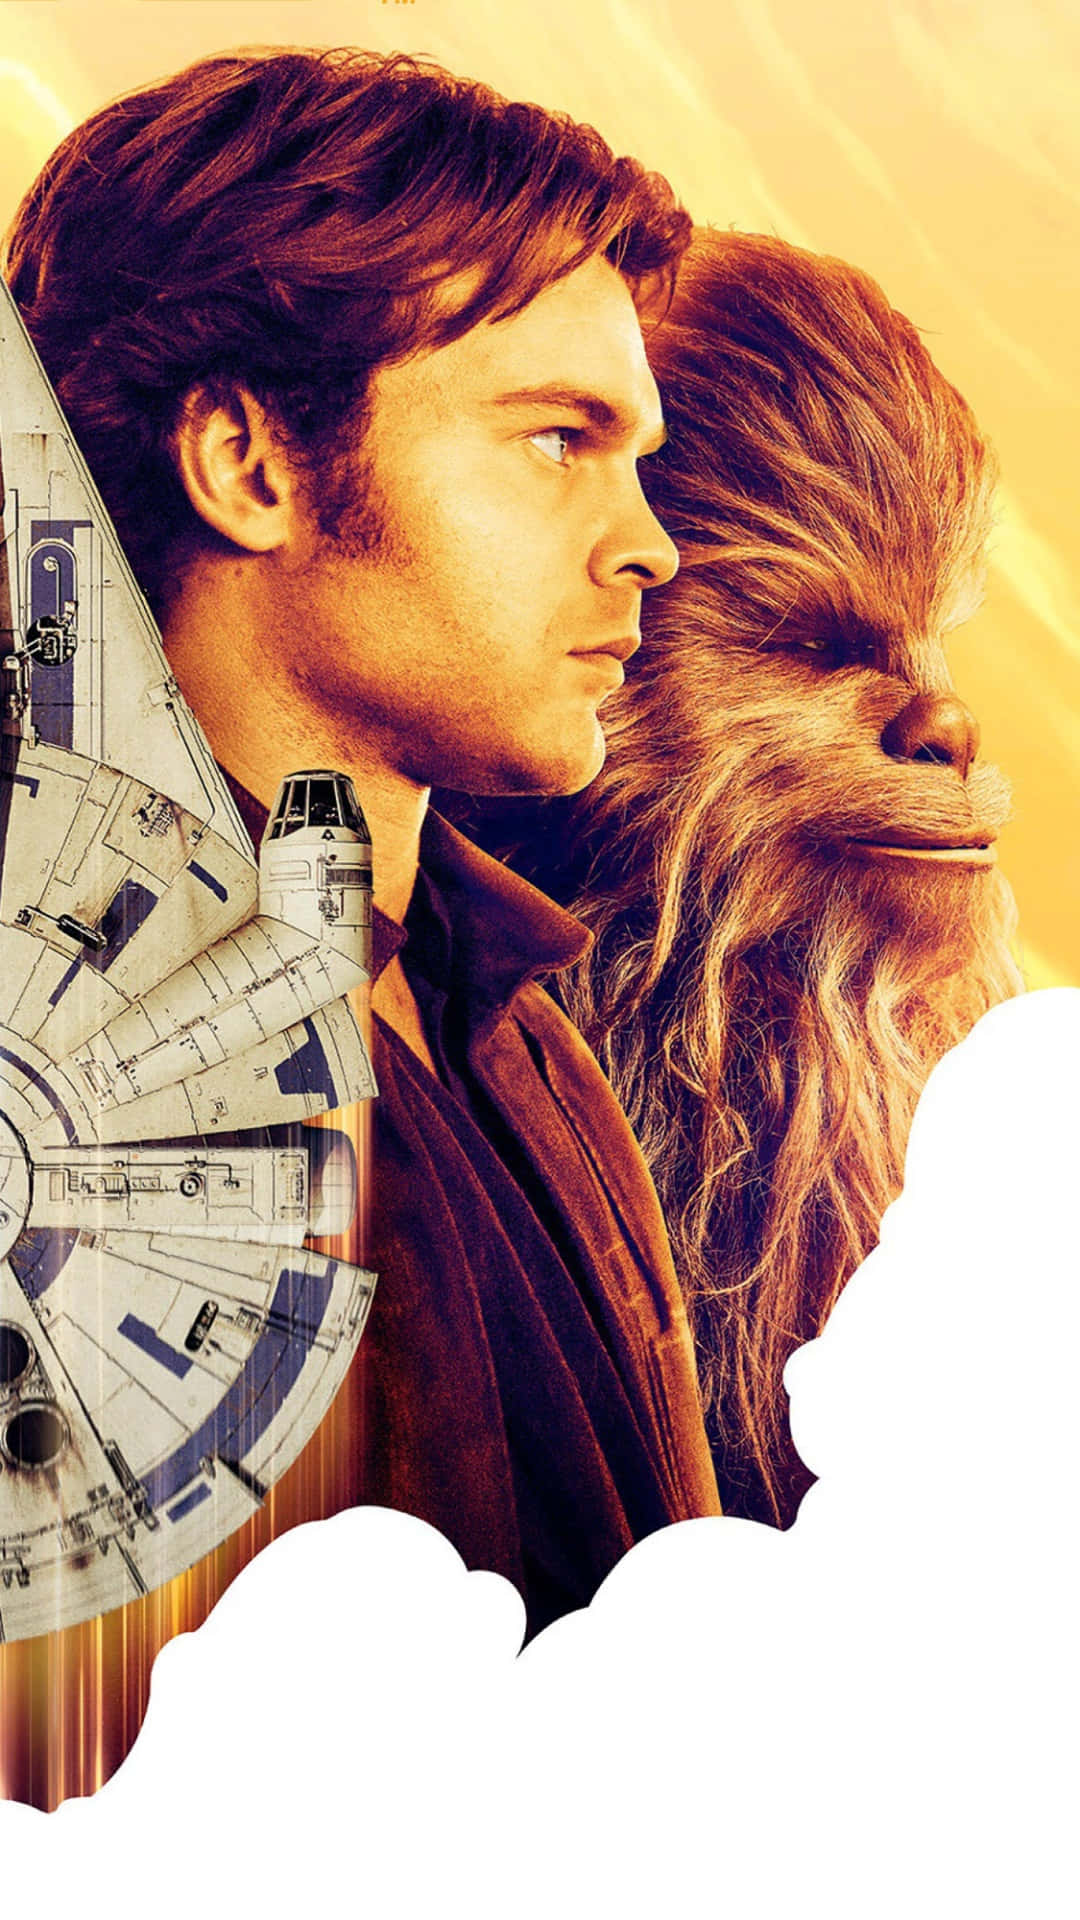 Han Solo and Chewbacca on an adventure in Solo: A Star Wars Story Wallpaper